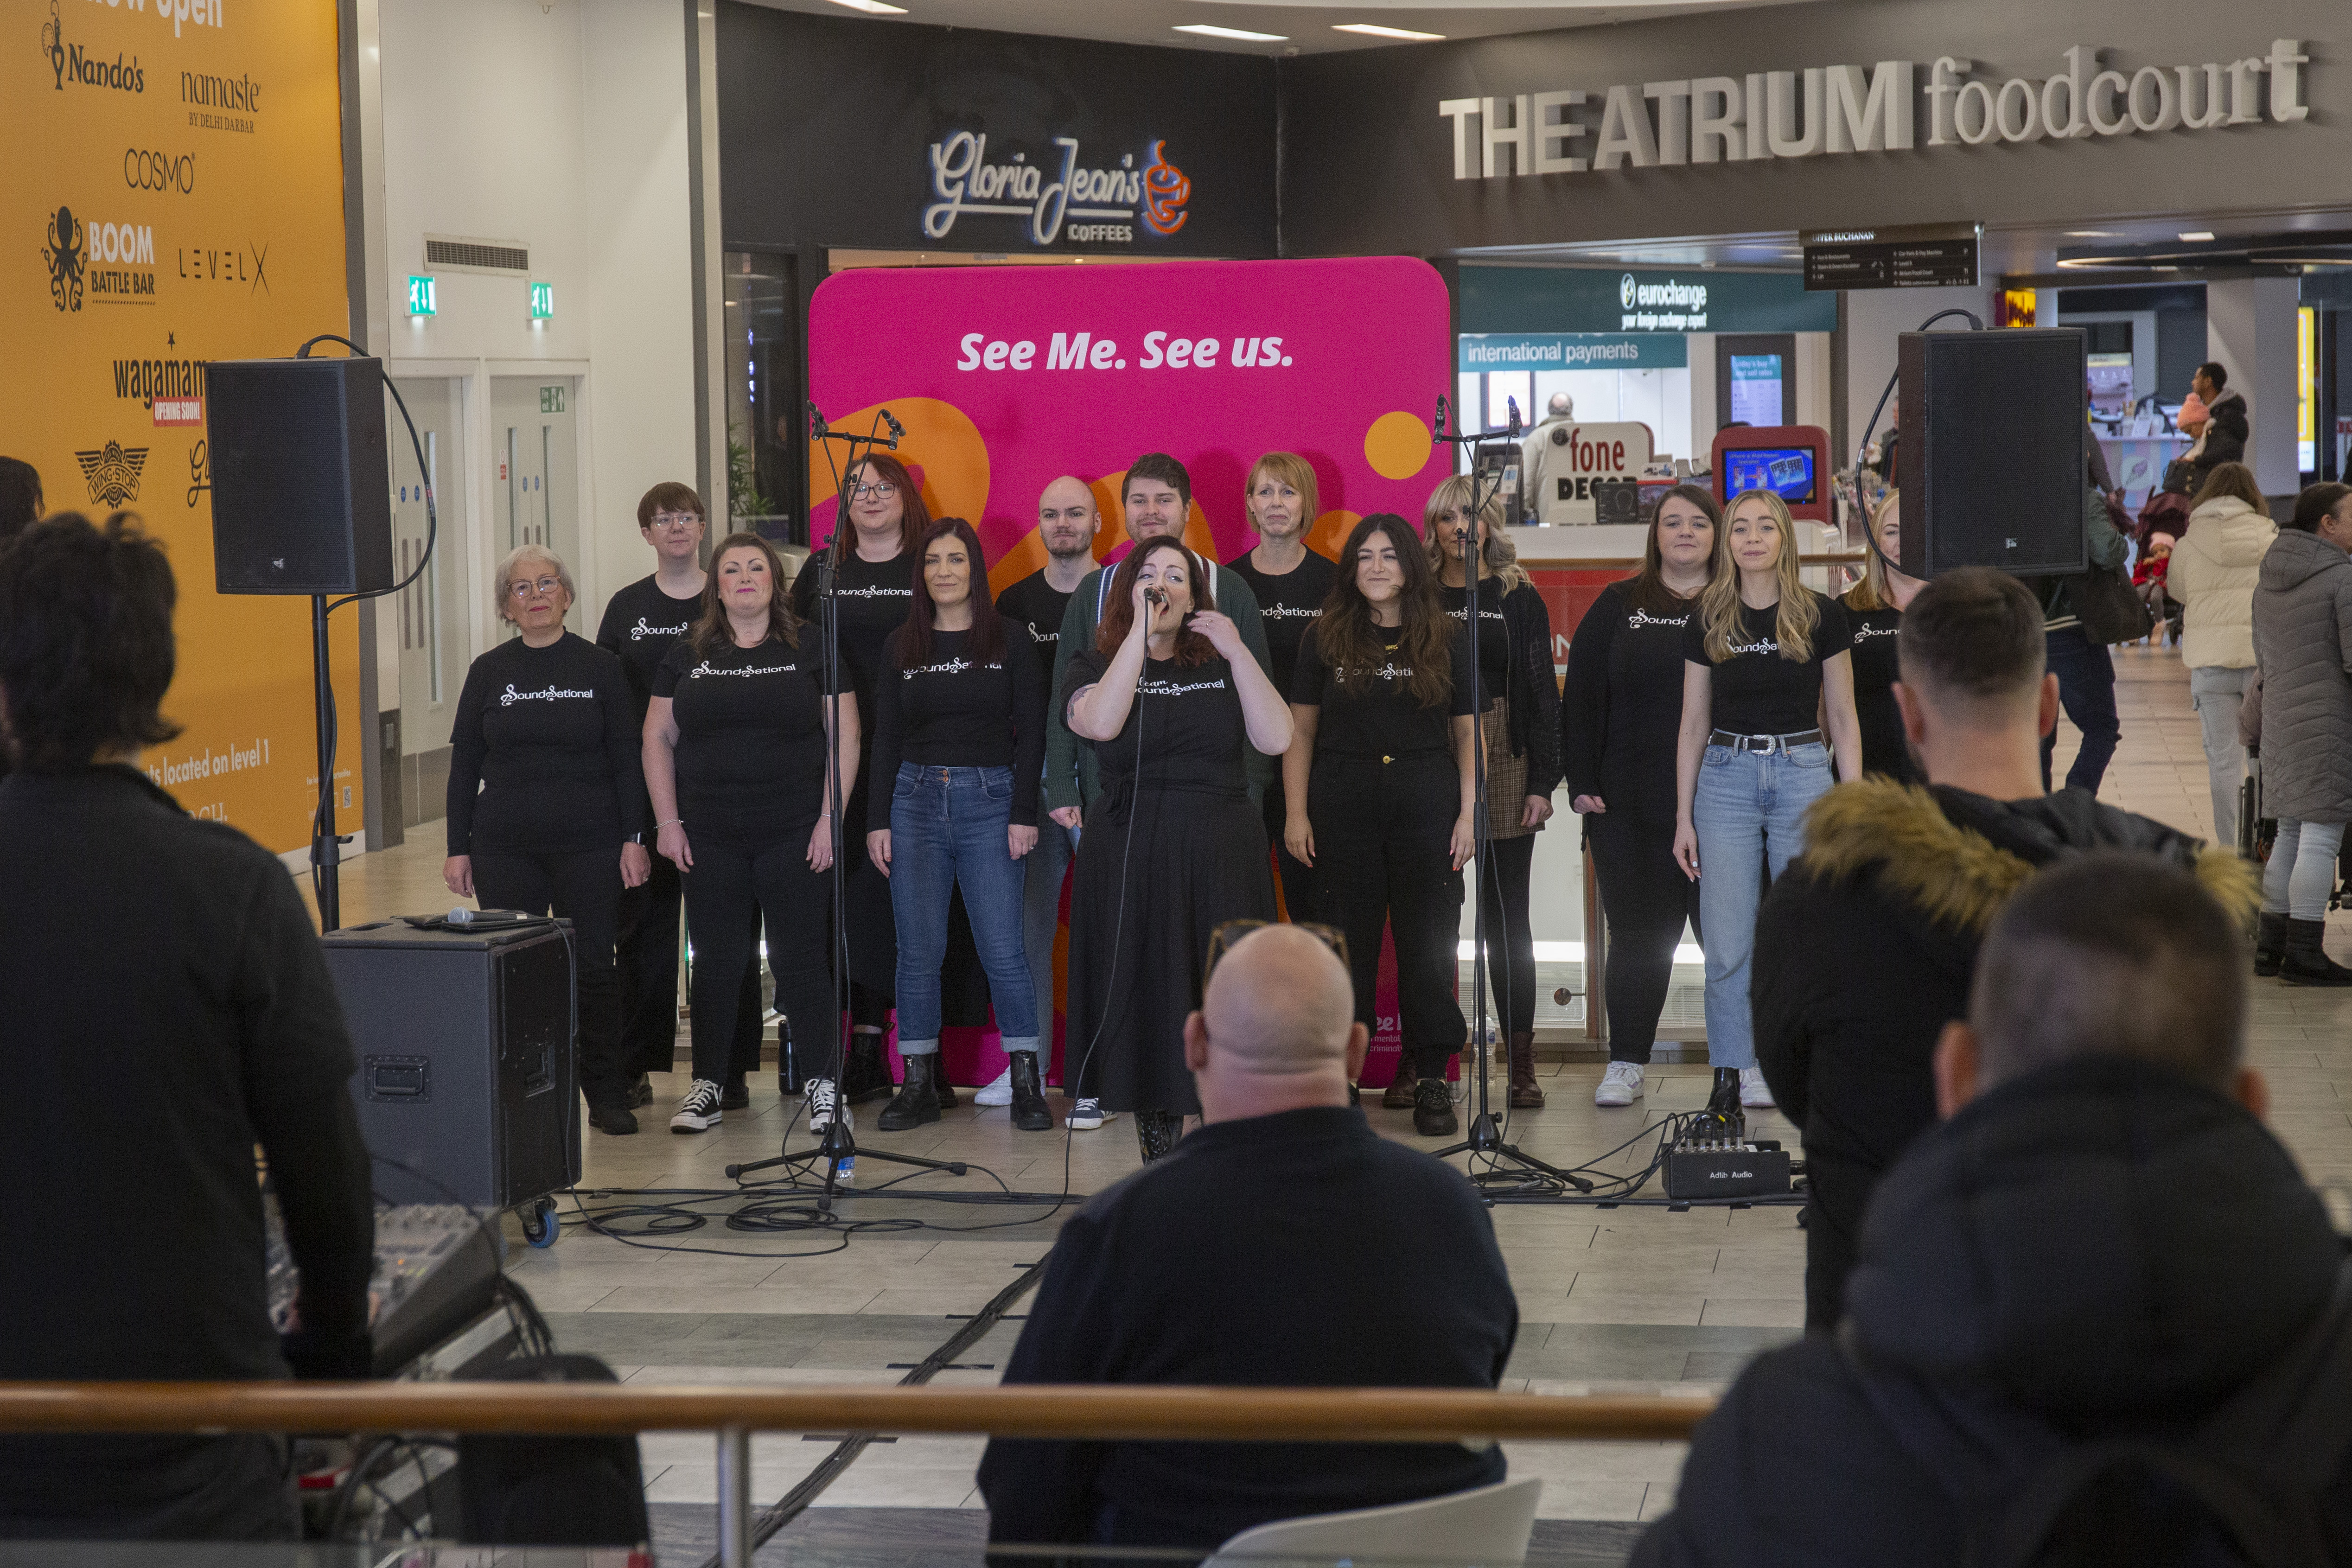 SoundSational choir performing at the St Enoch Centre